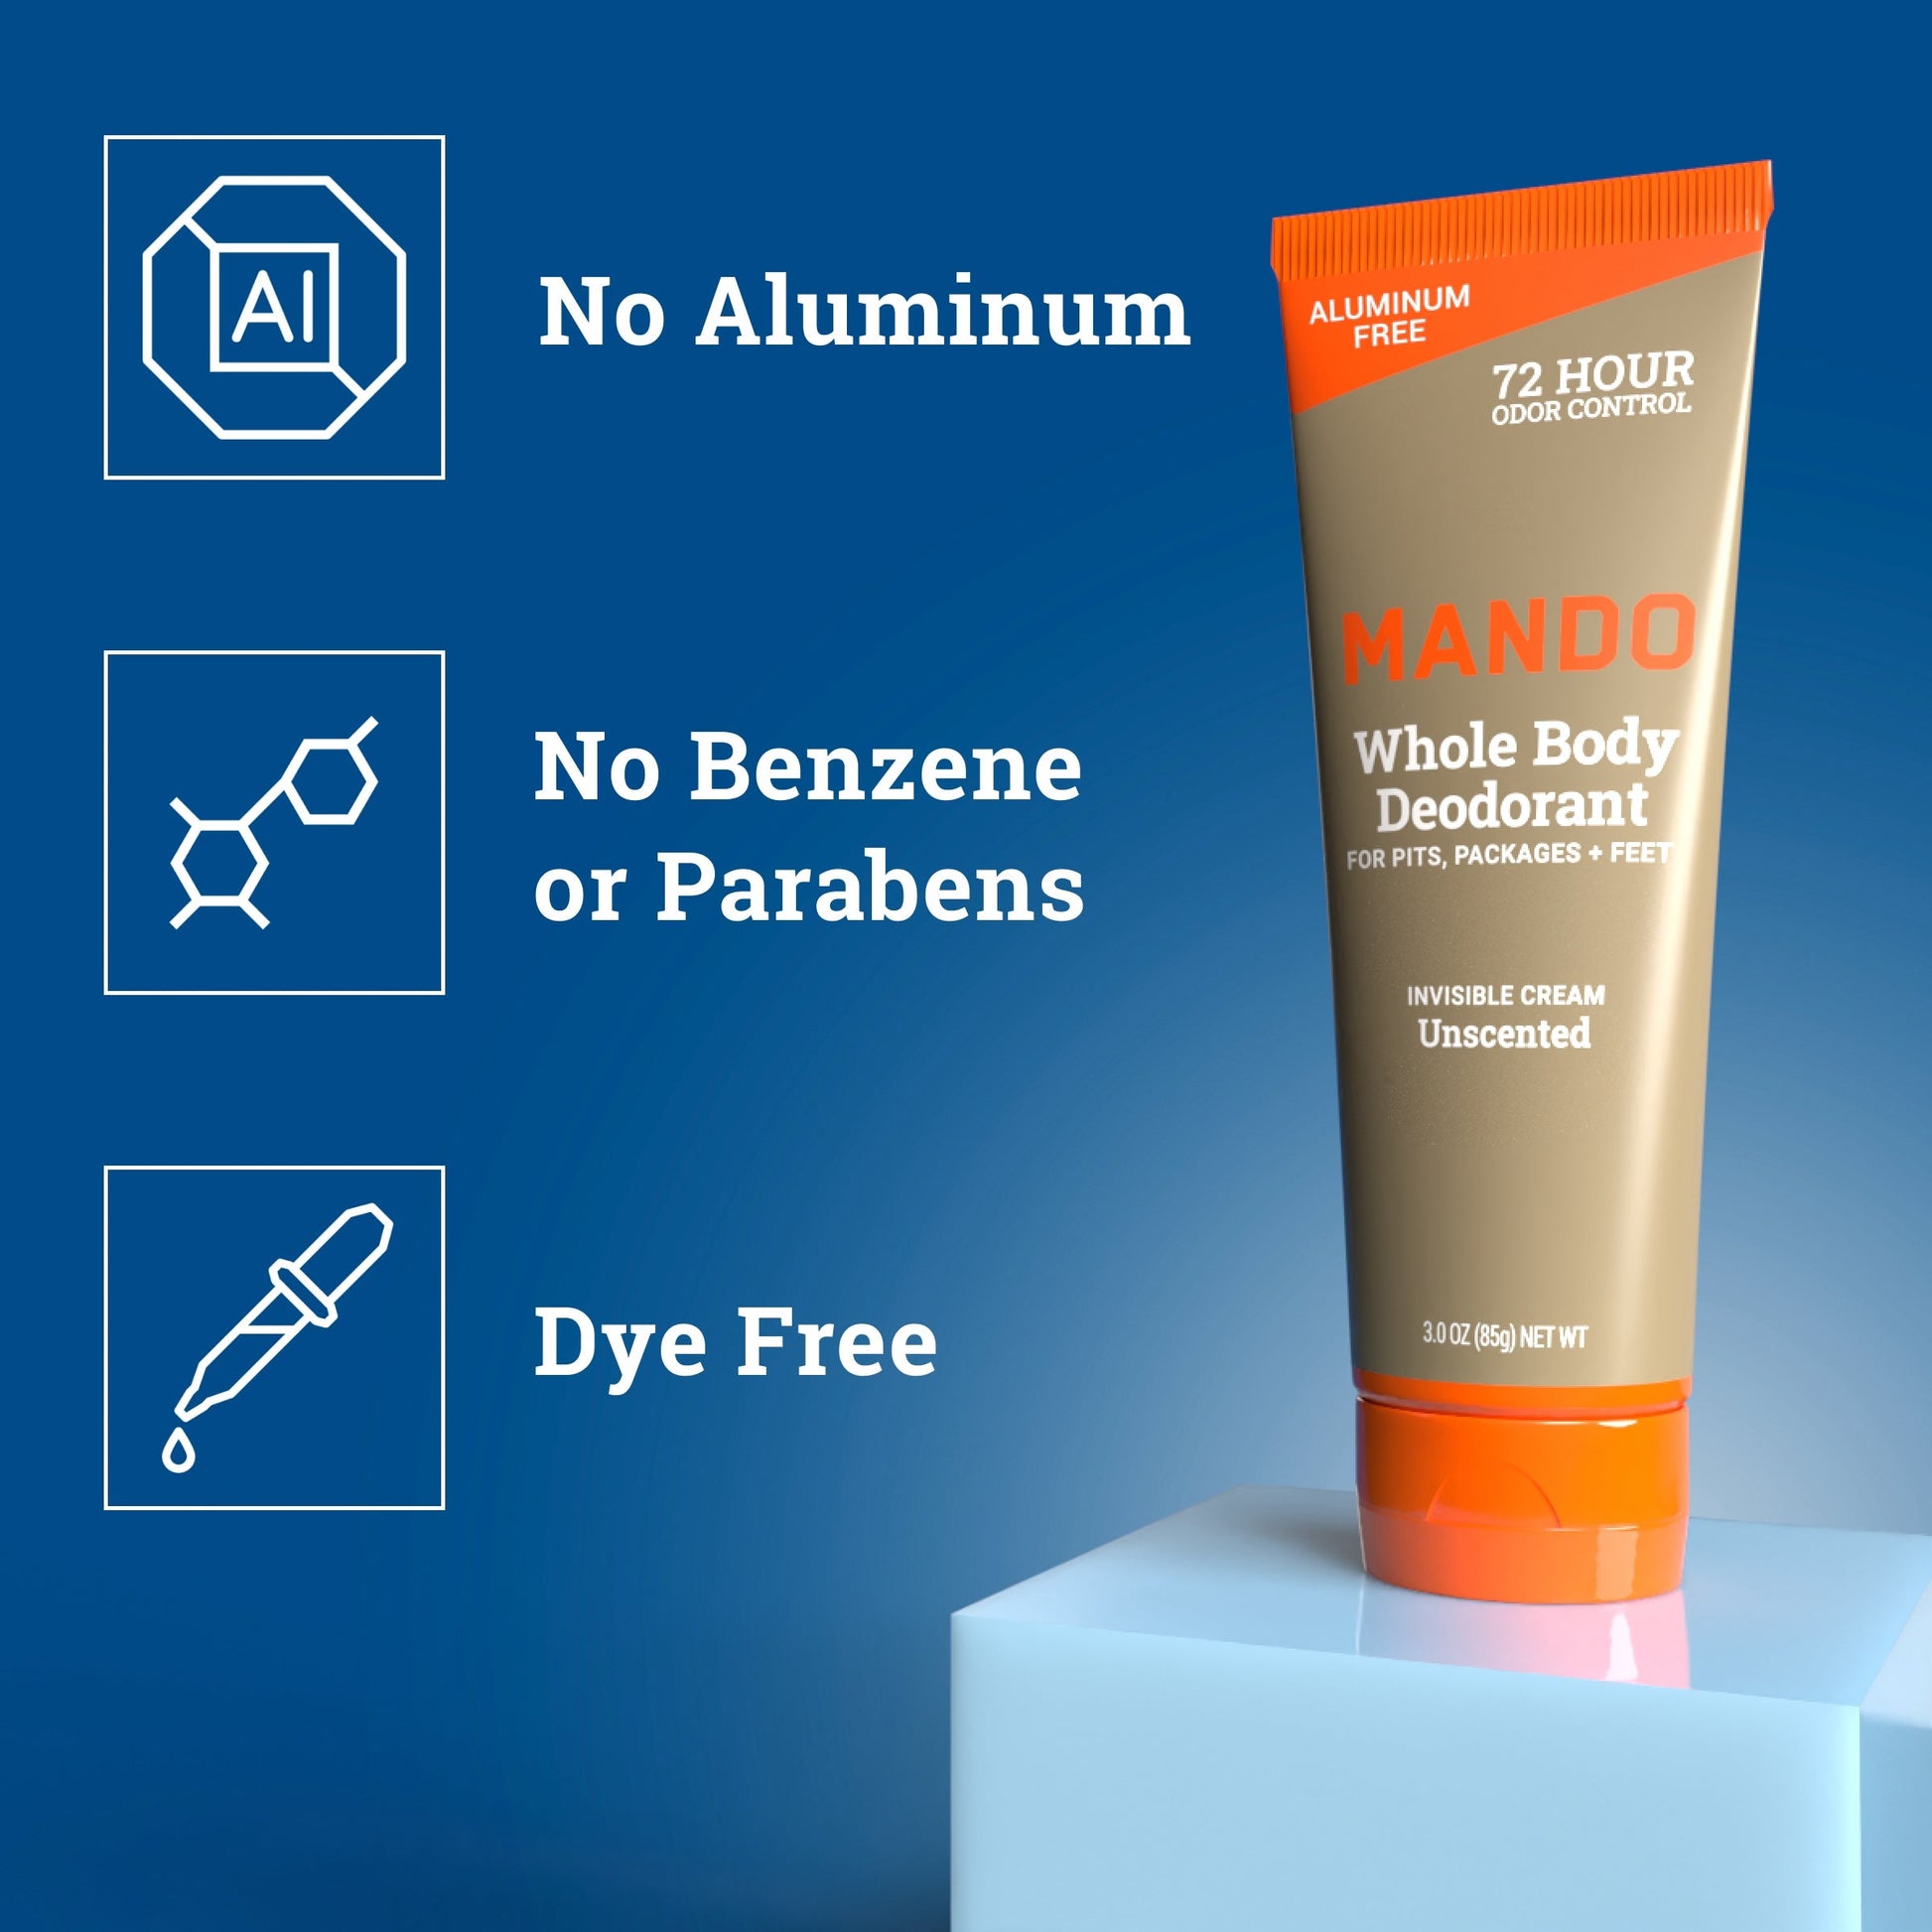 Mando Invisible cream deodorant in unscented with text: No Aluminum, No Benzene or Parabens, Bye Free